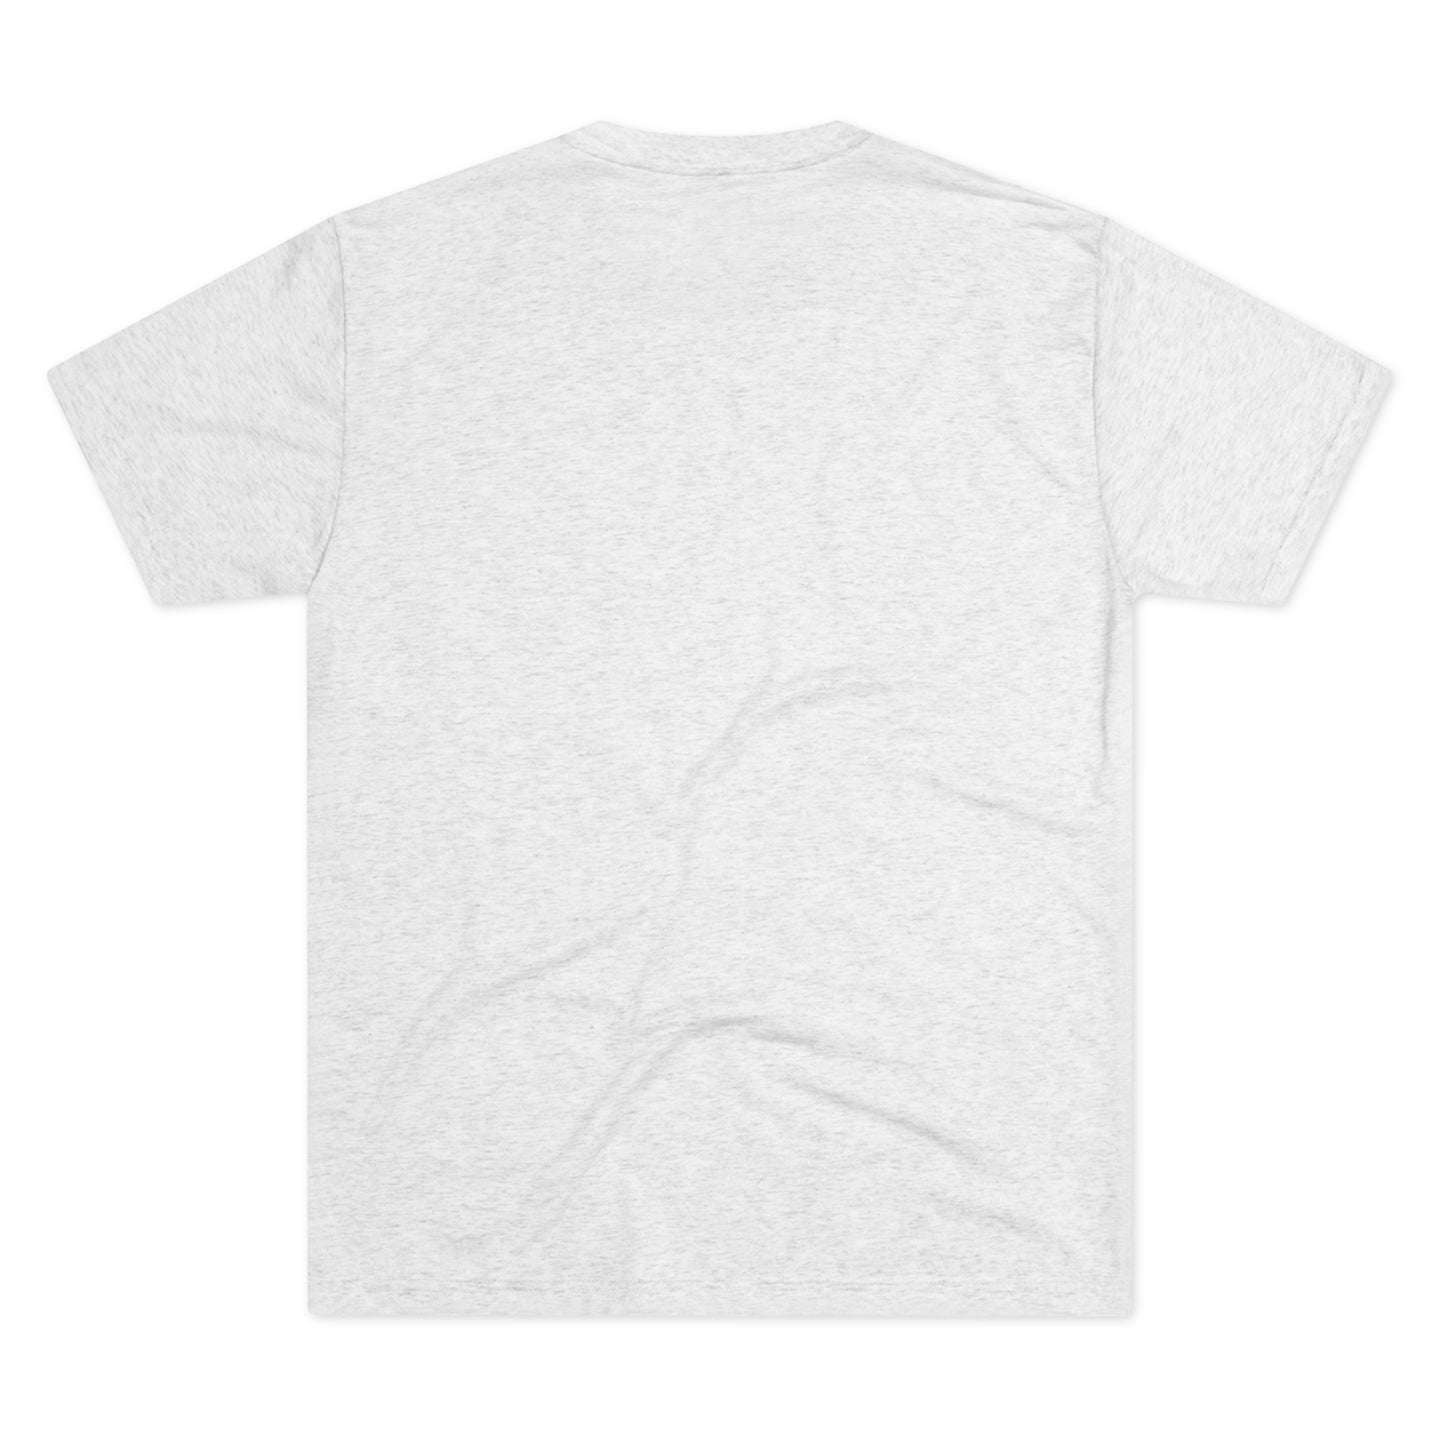 Baseball Bliss Tri-Blend Tee: Unbelievably Soft Comfort with a Stylish Edge - Perfect for Baseball Enthusiasts!